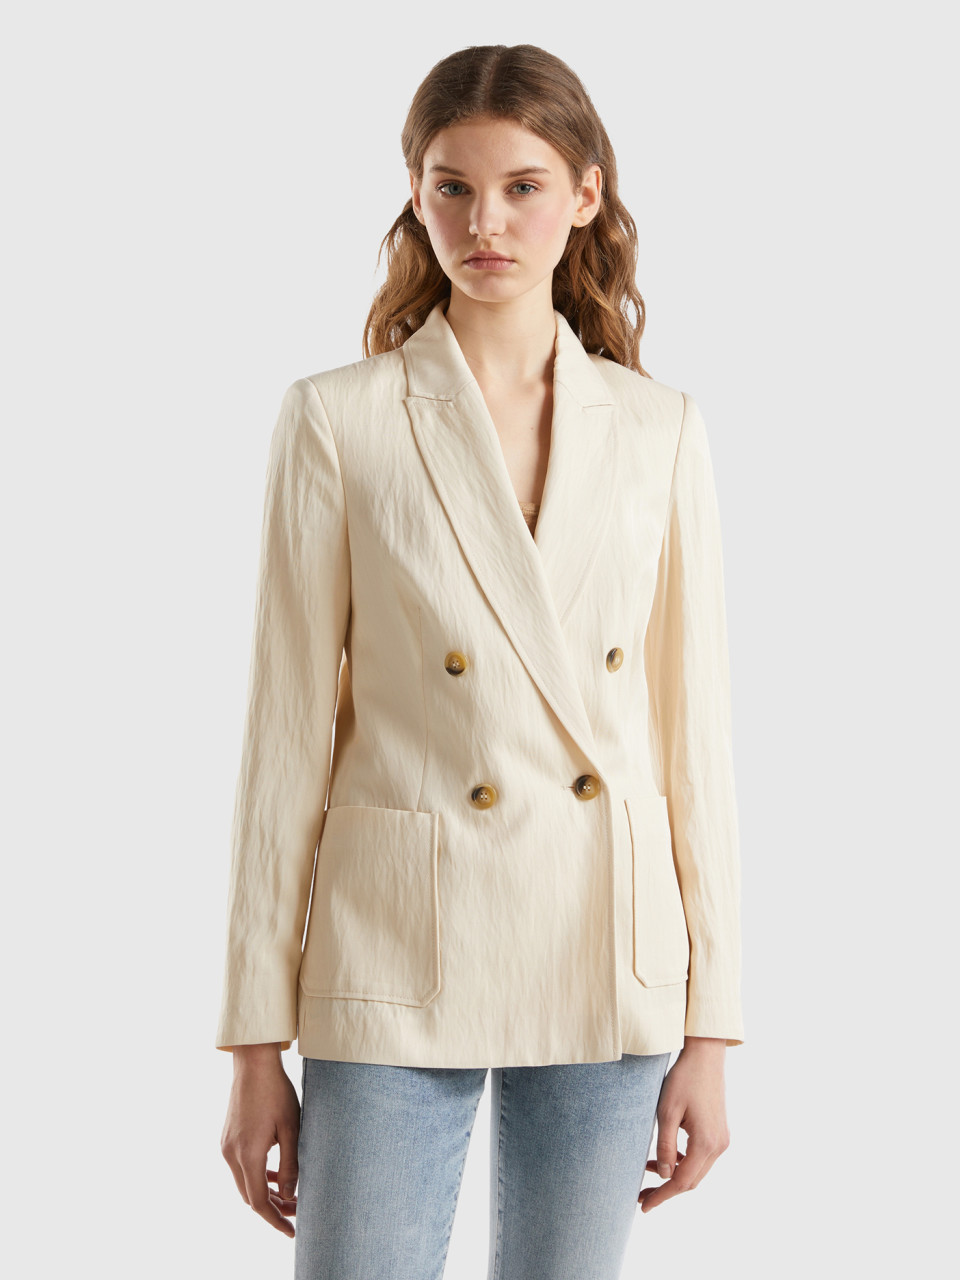 Benetton, Double-breasted Blazer In Sustainable Viscose Blend, Creamy White, Women